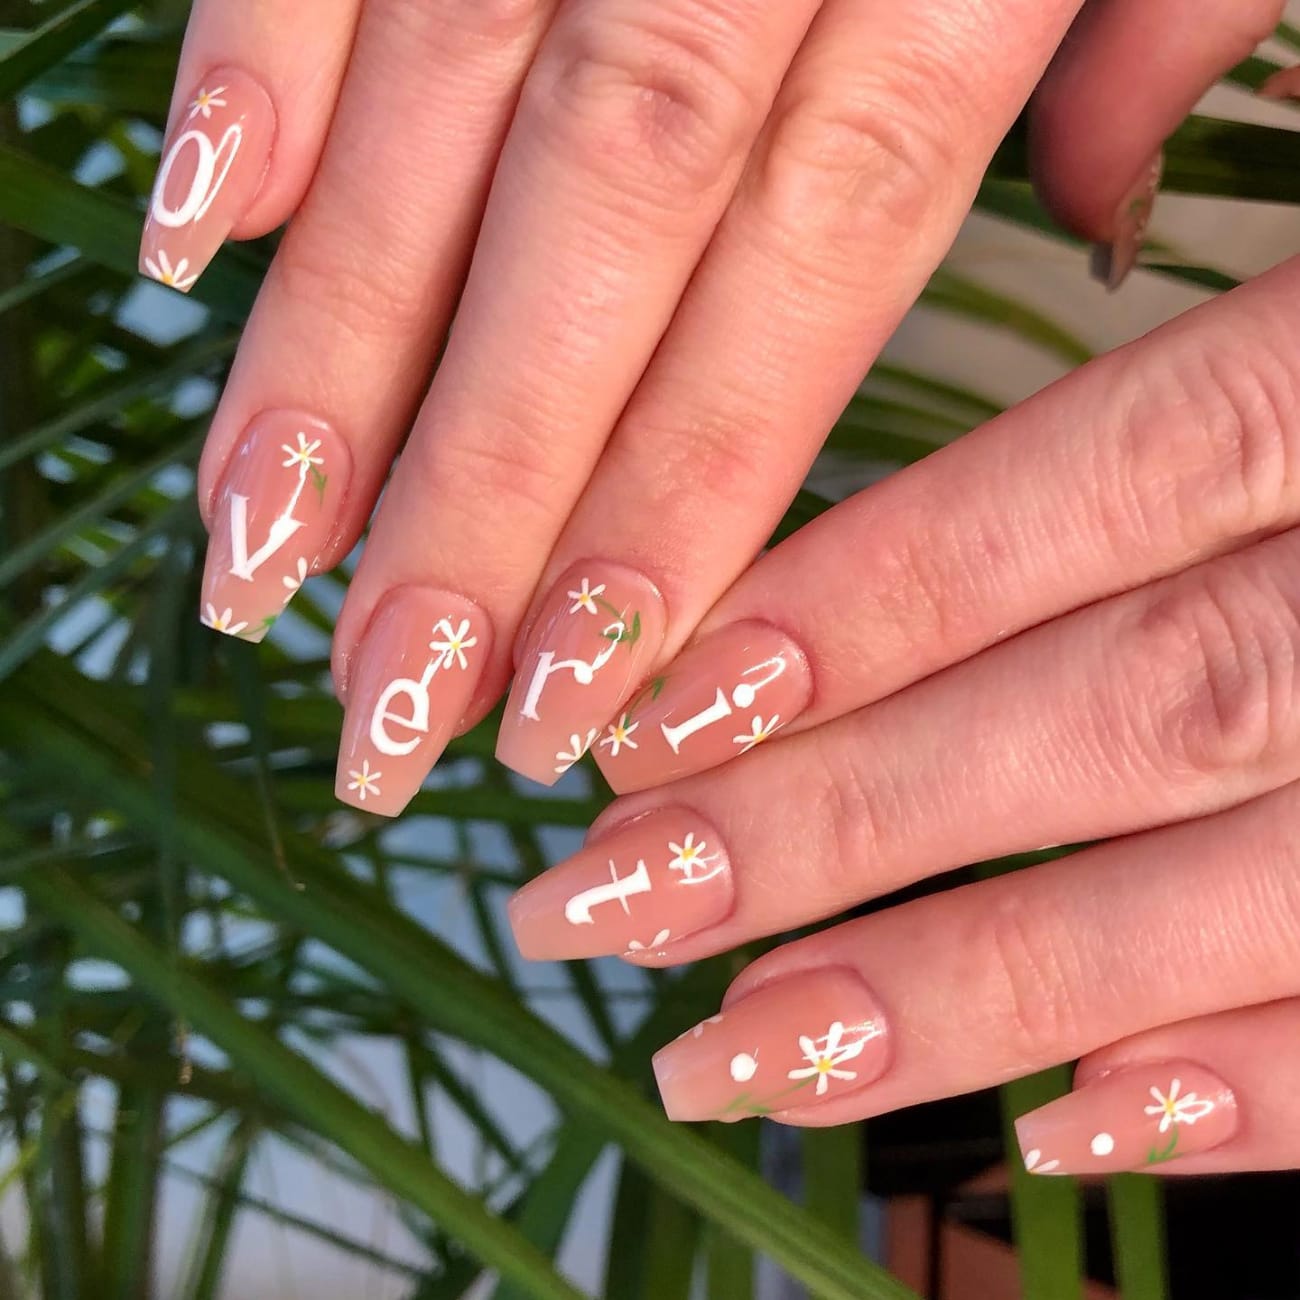 Flower Nails with Letters